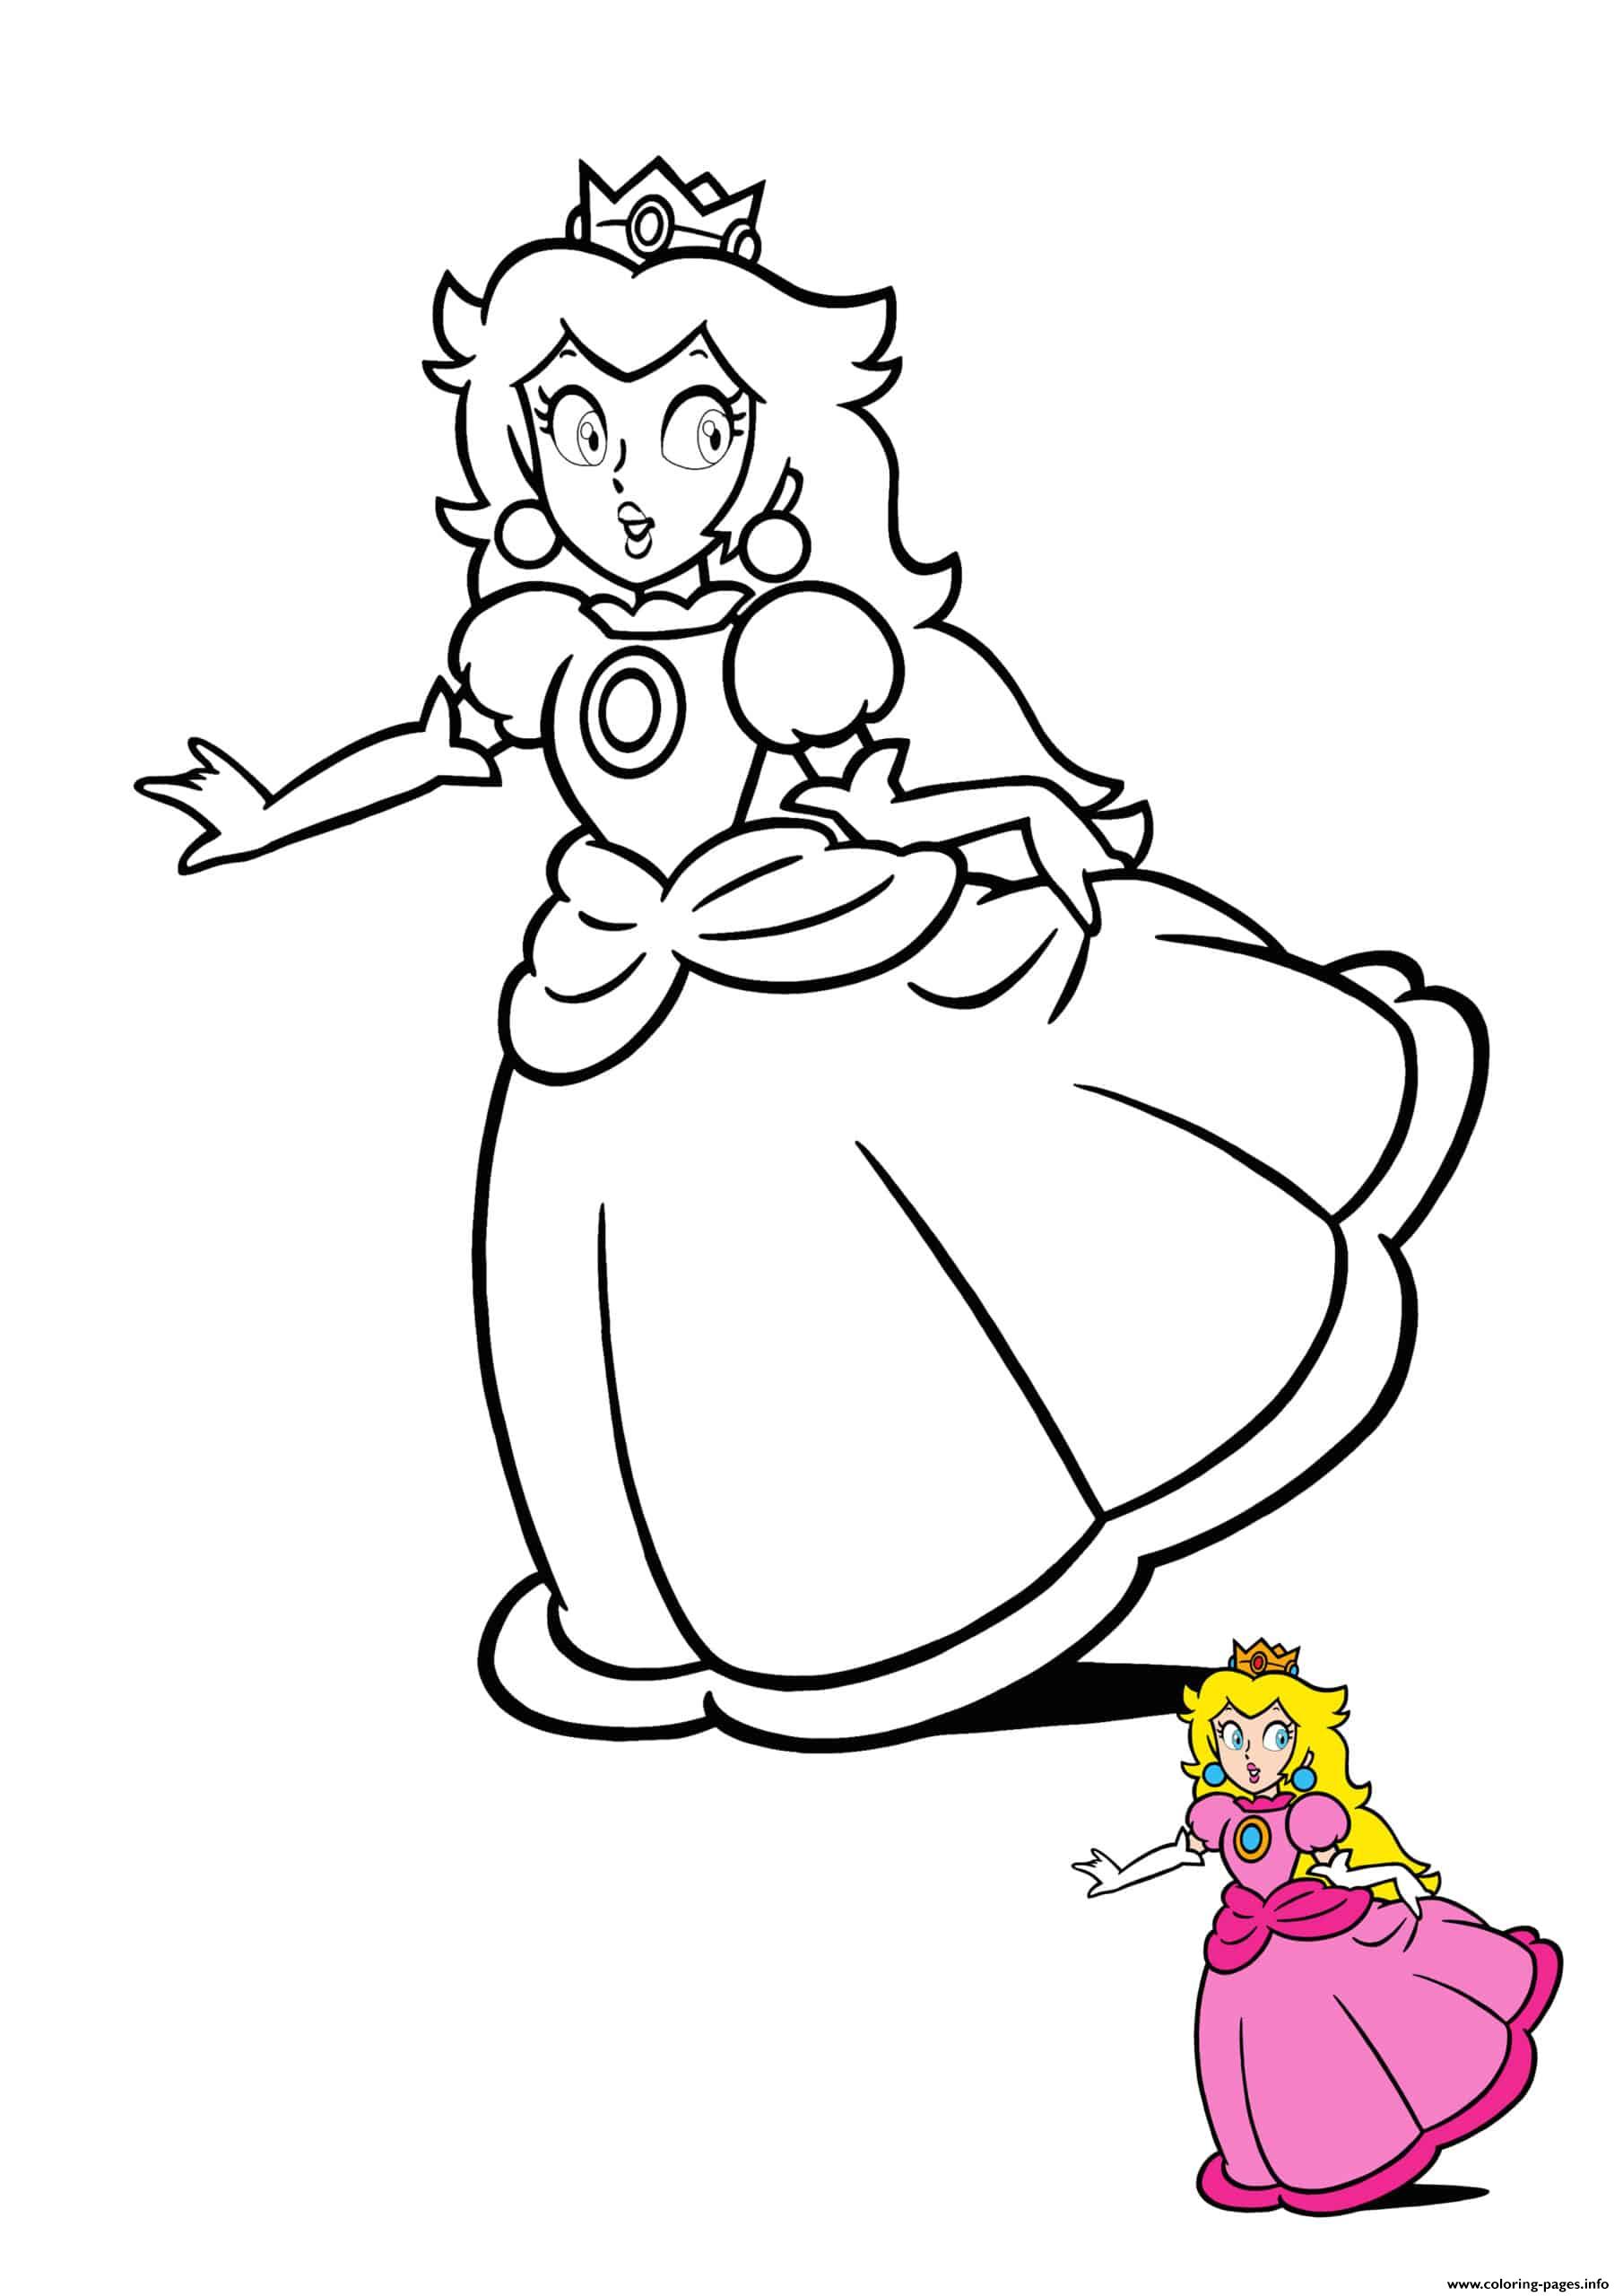 Princess Peach Colouring Pages To Print / Princess Peach Coloring Pages